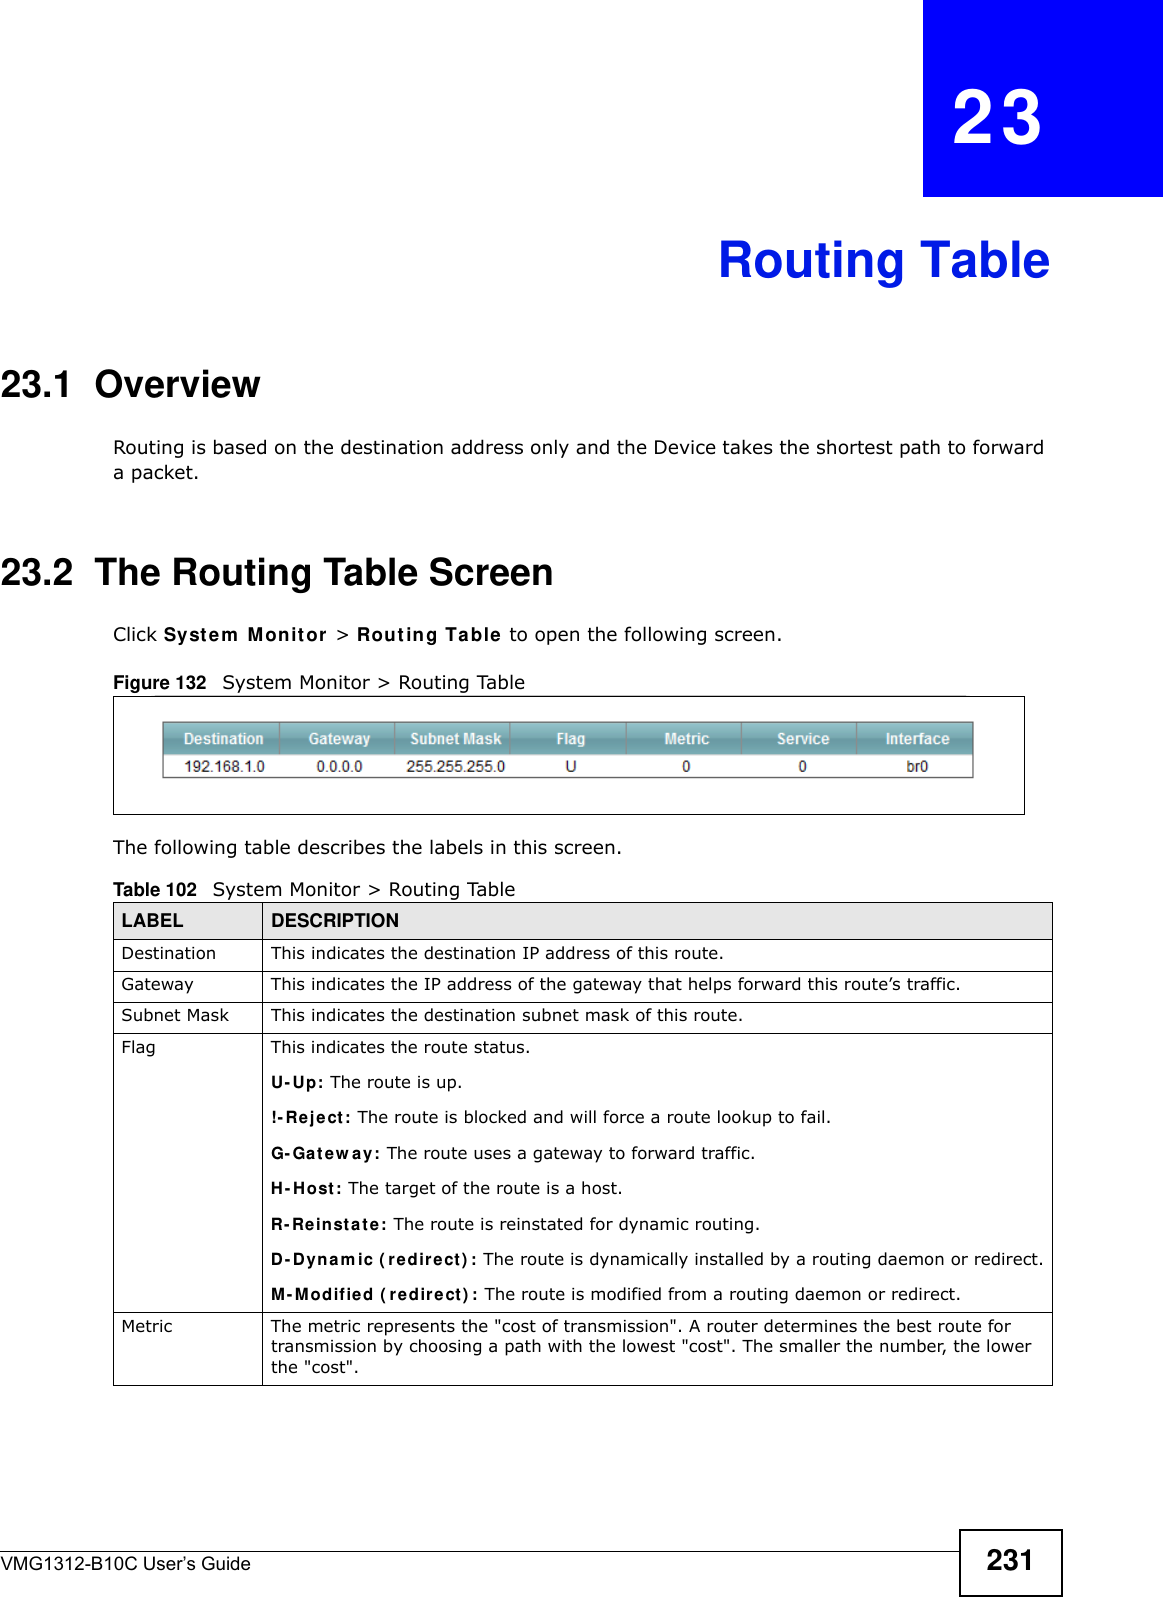 VMG1312-B10C User’s Guide 231CHAPTER   23Routing Table23.1  OverviewRouting is based on the destination address only and the Device takes the shortest path to forward a packet.23.2  The Routing Table ScreenClick Syst e m  M onit or  &gt; Rou t ing Ta ble to open the following screen.Figure 132   System Monitor &gt; Routing TableThe following table describes the labels in this screen.Table 102   System Monitor &gt; Routing TableLABEL DESCRIPTIONDestination This indicates the destination IP address of this route.Gateway This indicates the IP address of the gateway that helps forward this route’s traffic.Subnet Mask This indicates the destination subnet mask of this route.Flag This indicates the route status.U- Up: The route is up.!- Re j e ct :  The route is blocked and will force a route lookup to fail.G- Ga tew a y: The route uses a gateway to forward traffic. H - H ost : The target of the route is a host.R- Re in st a t e : The route is reinstated for dynamic routing.D- D yn a m ic ( redir ect ) : The route is dynamically installed by a routing daemon or redirect.M- M odified ( redirect ) : The route is modified from a routing daemon or redirect.Metric The metric represents the &quot;cost of transmission&quot;. A router determines the best route for transmission by choosing a path with the lowest &quot;cost&quot;. The smaller the number, the lower the &quot;cost&quot;.